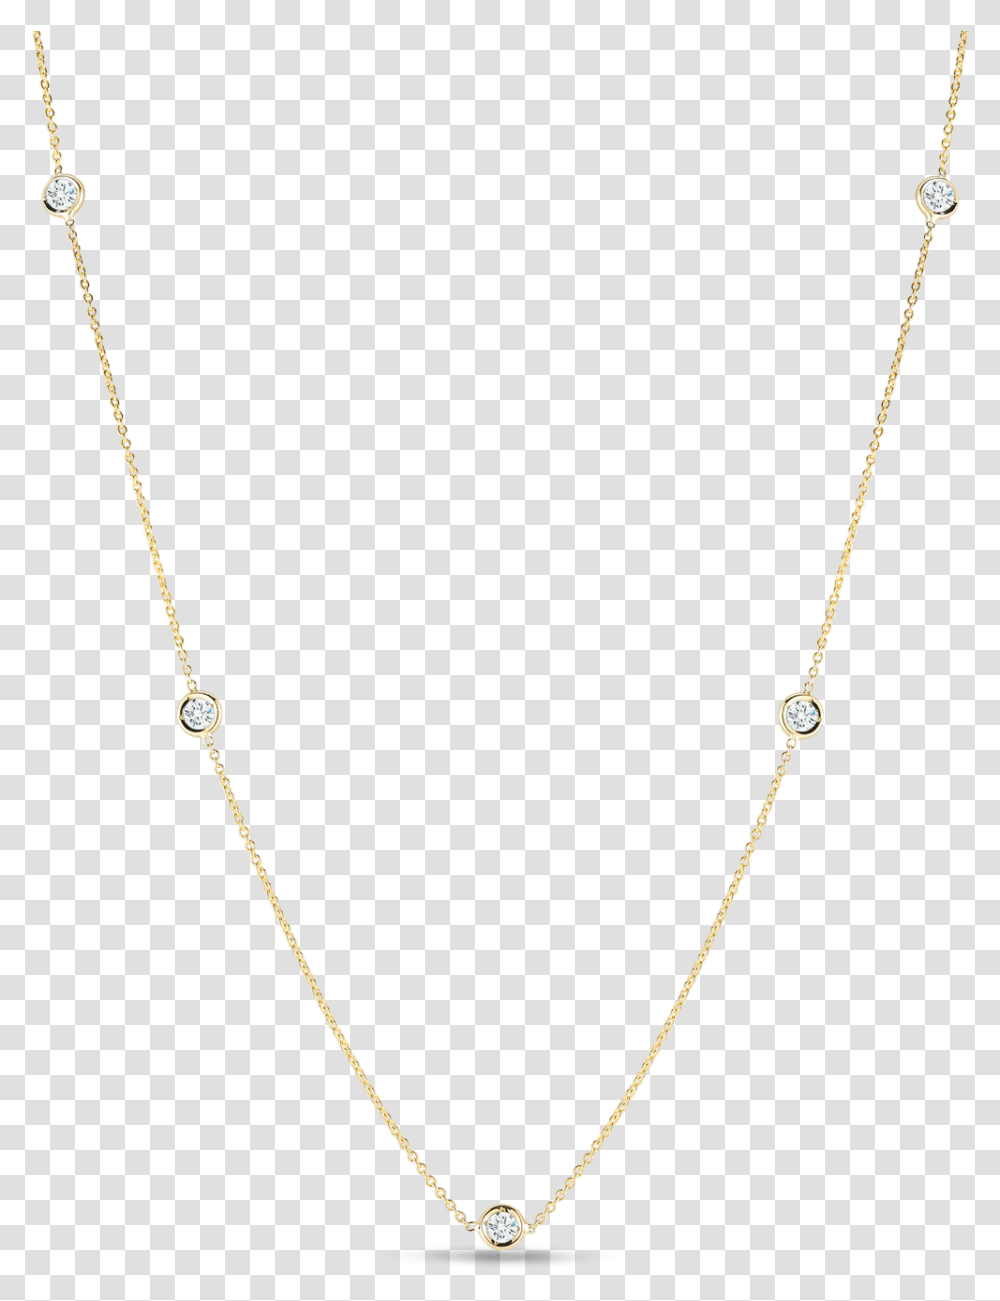 Gold Chain, Necklace, Jewelry, Accessories Transparent Png